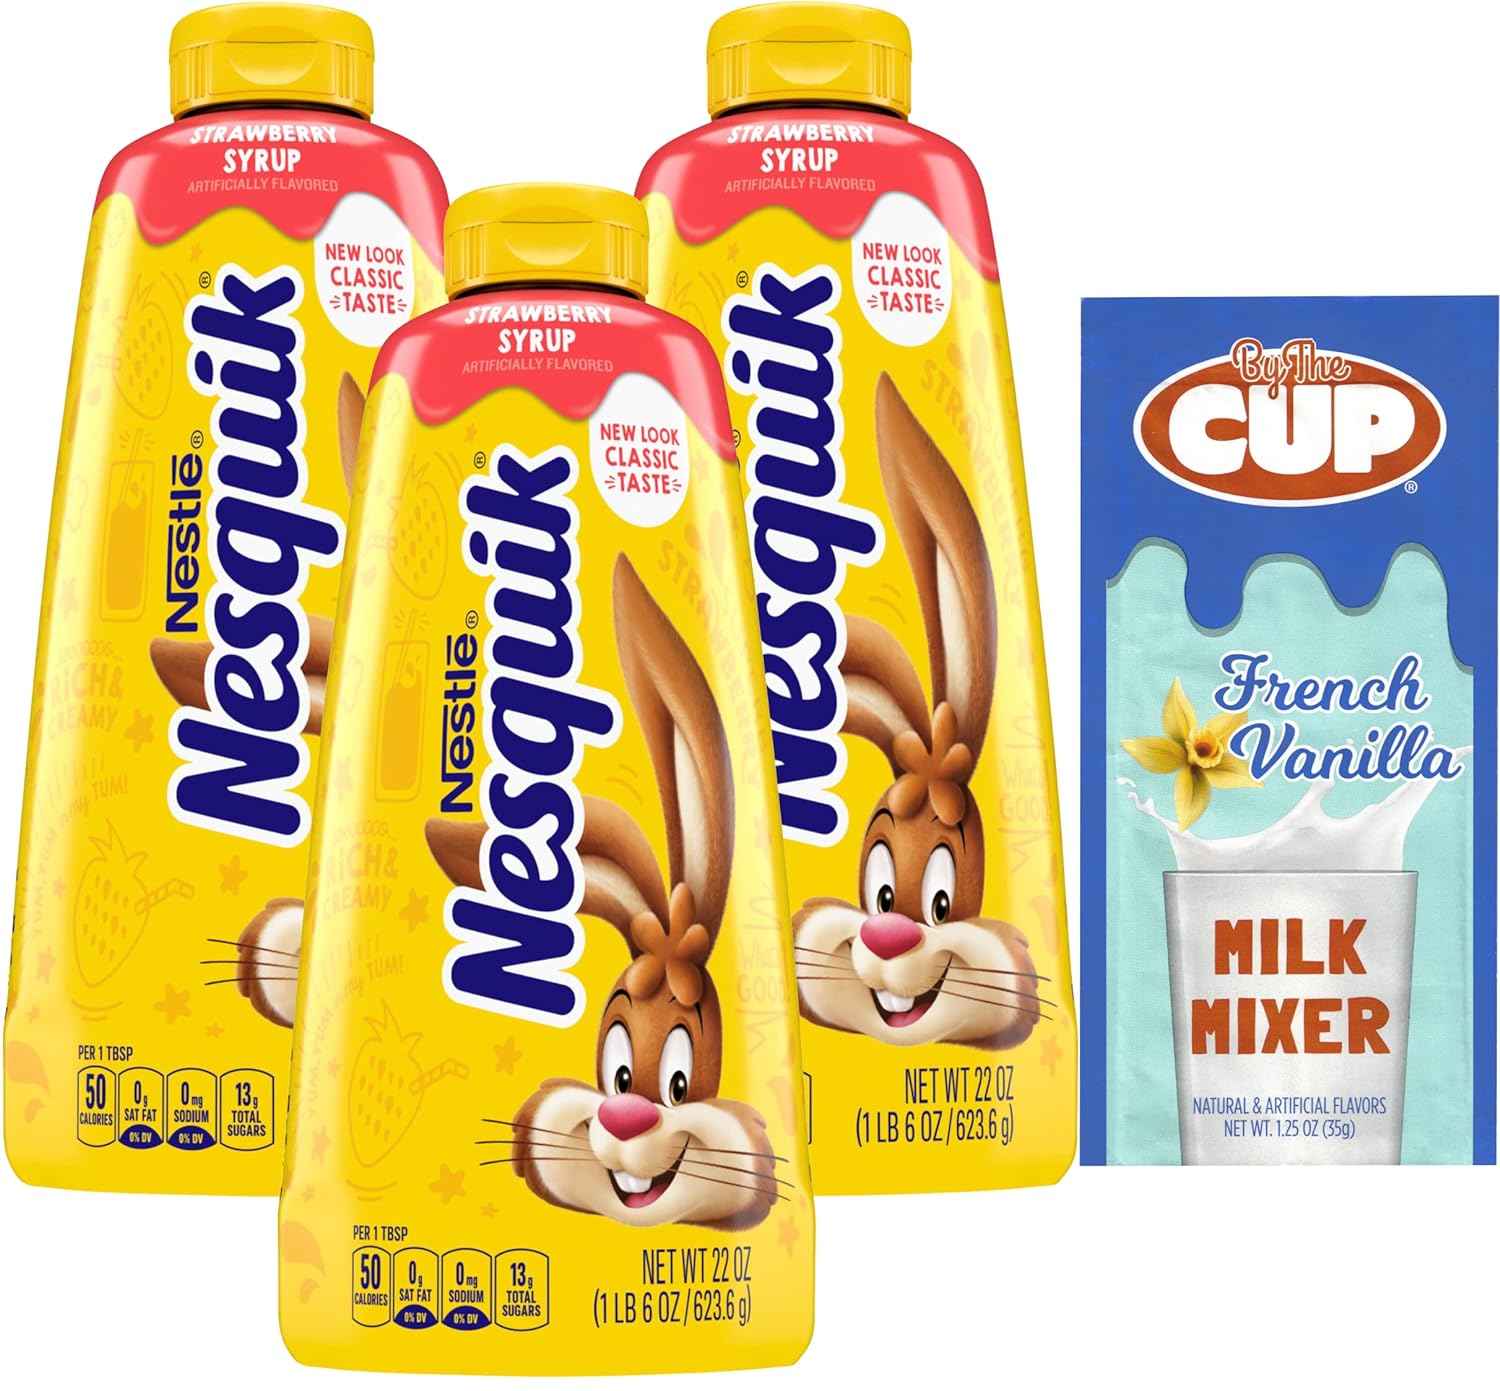 Nesquik Strawberry Syrup Bundle, 22 oz Bottle (Pack of 3) with By The Cup Milk Mixer